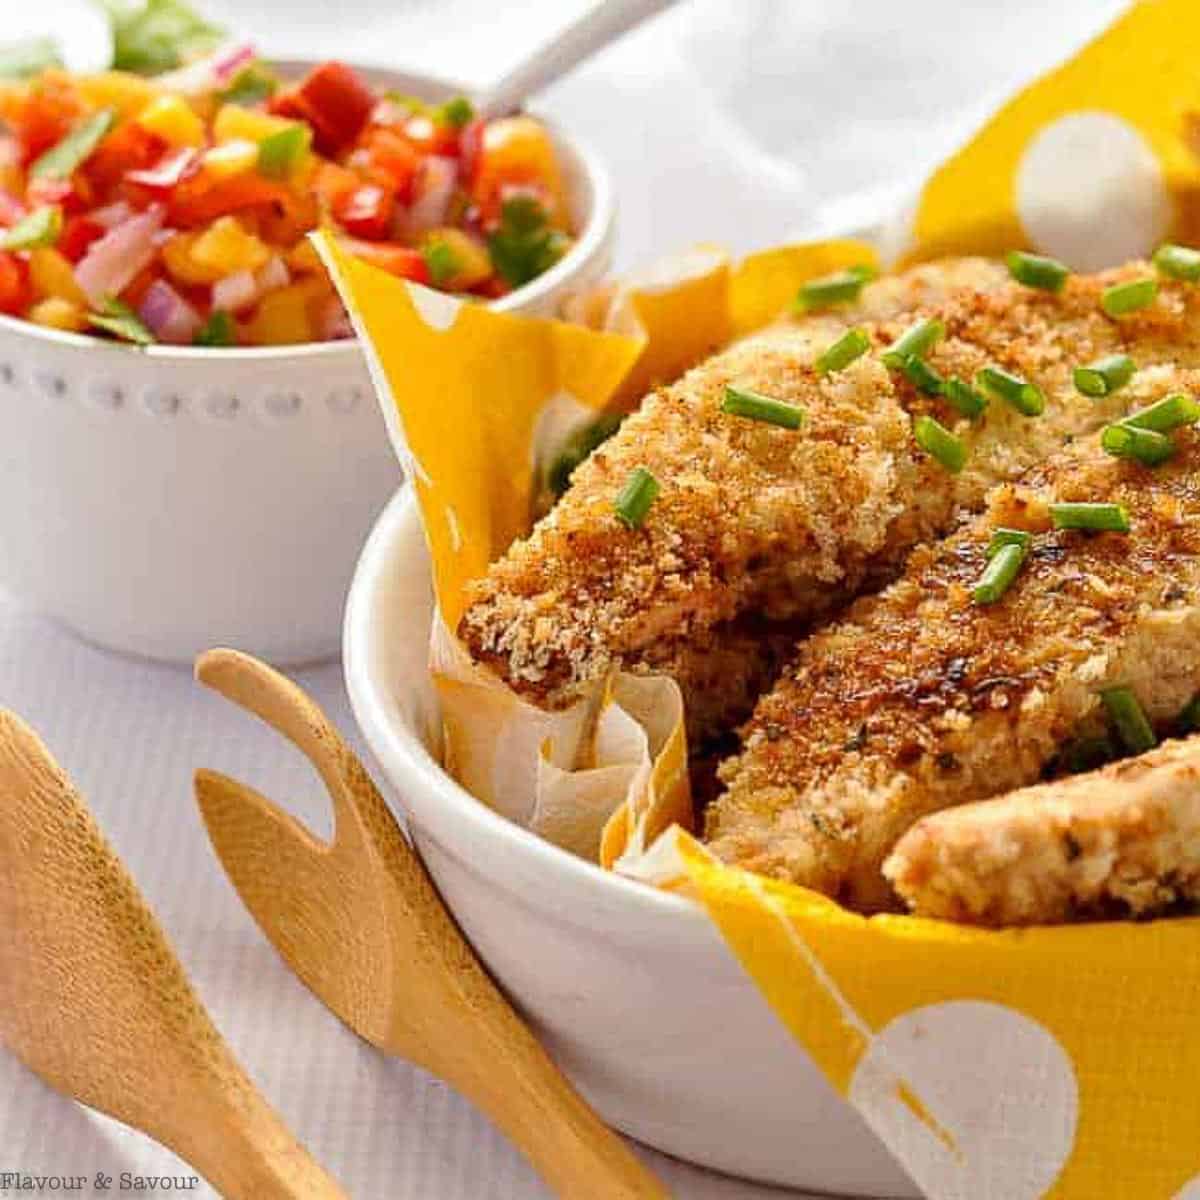 Crispy chicken tenders with a bowl of nectarine salsa.